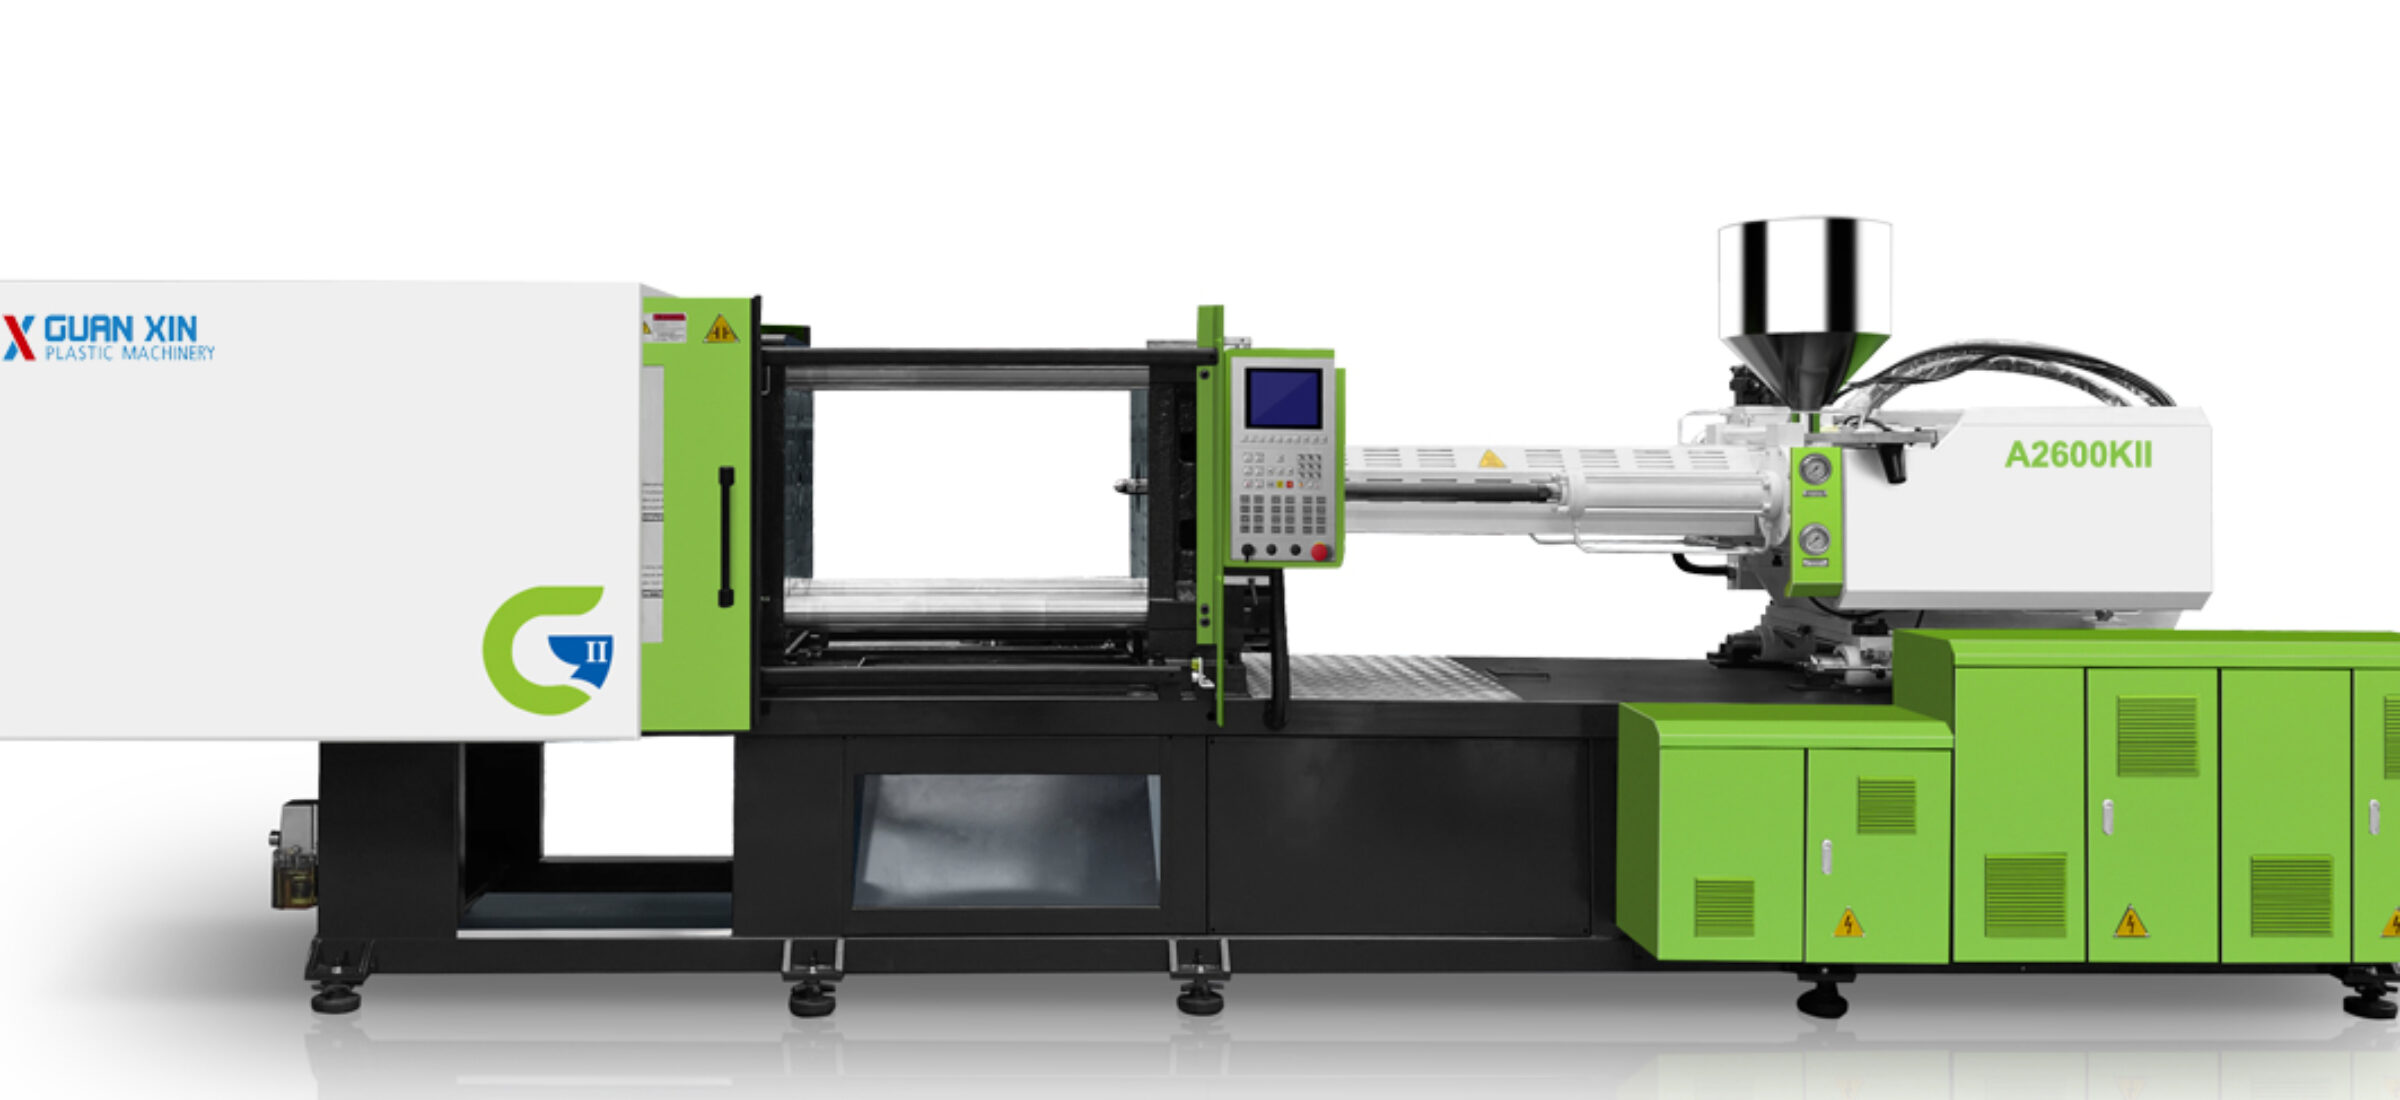 Introduction of injection molding machine